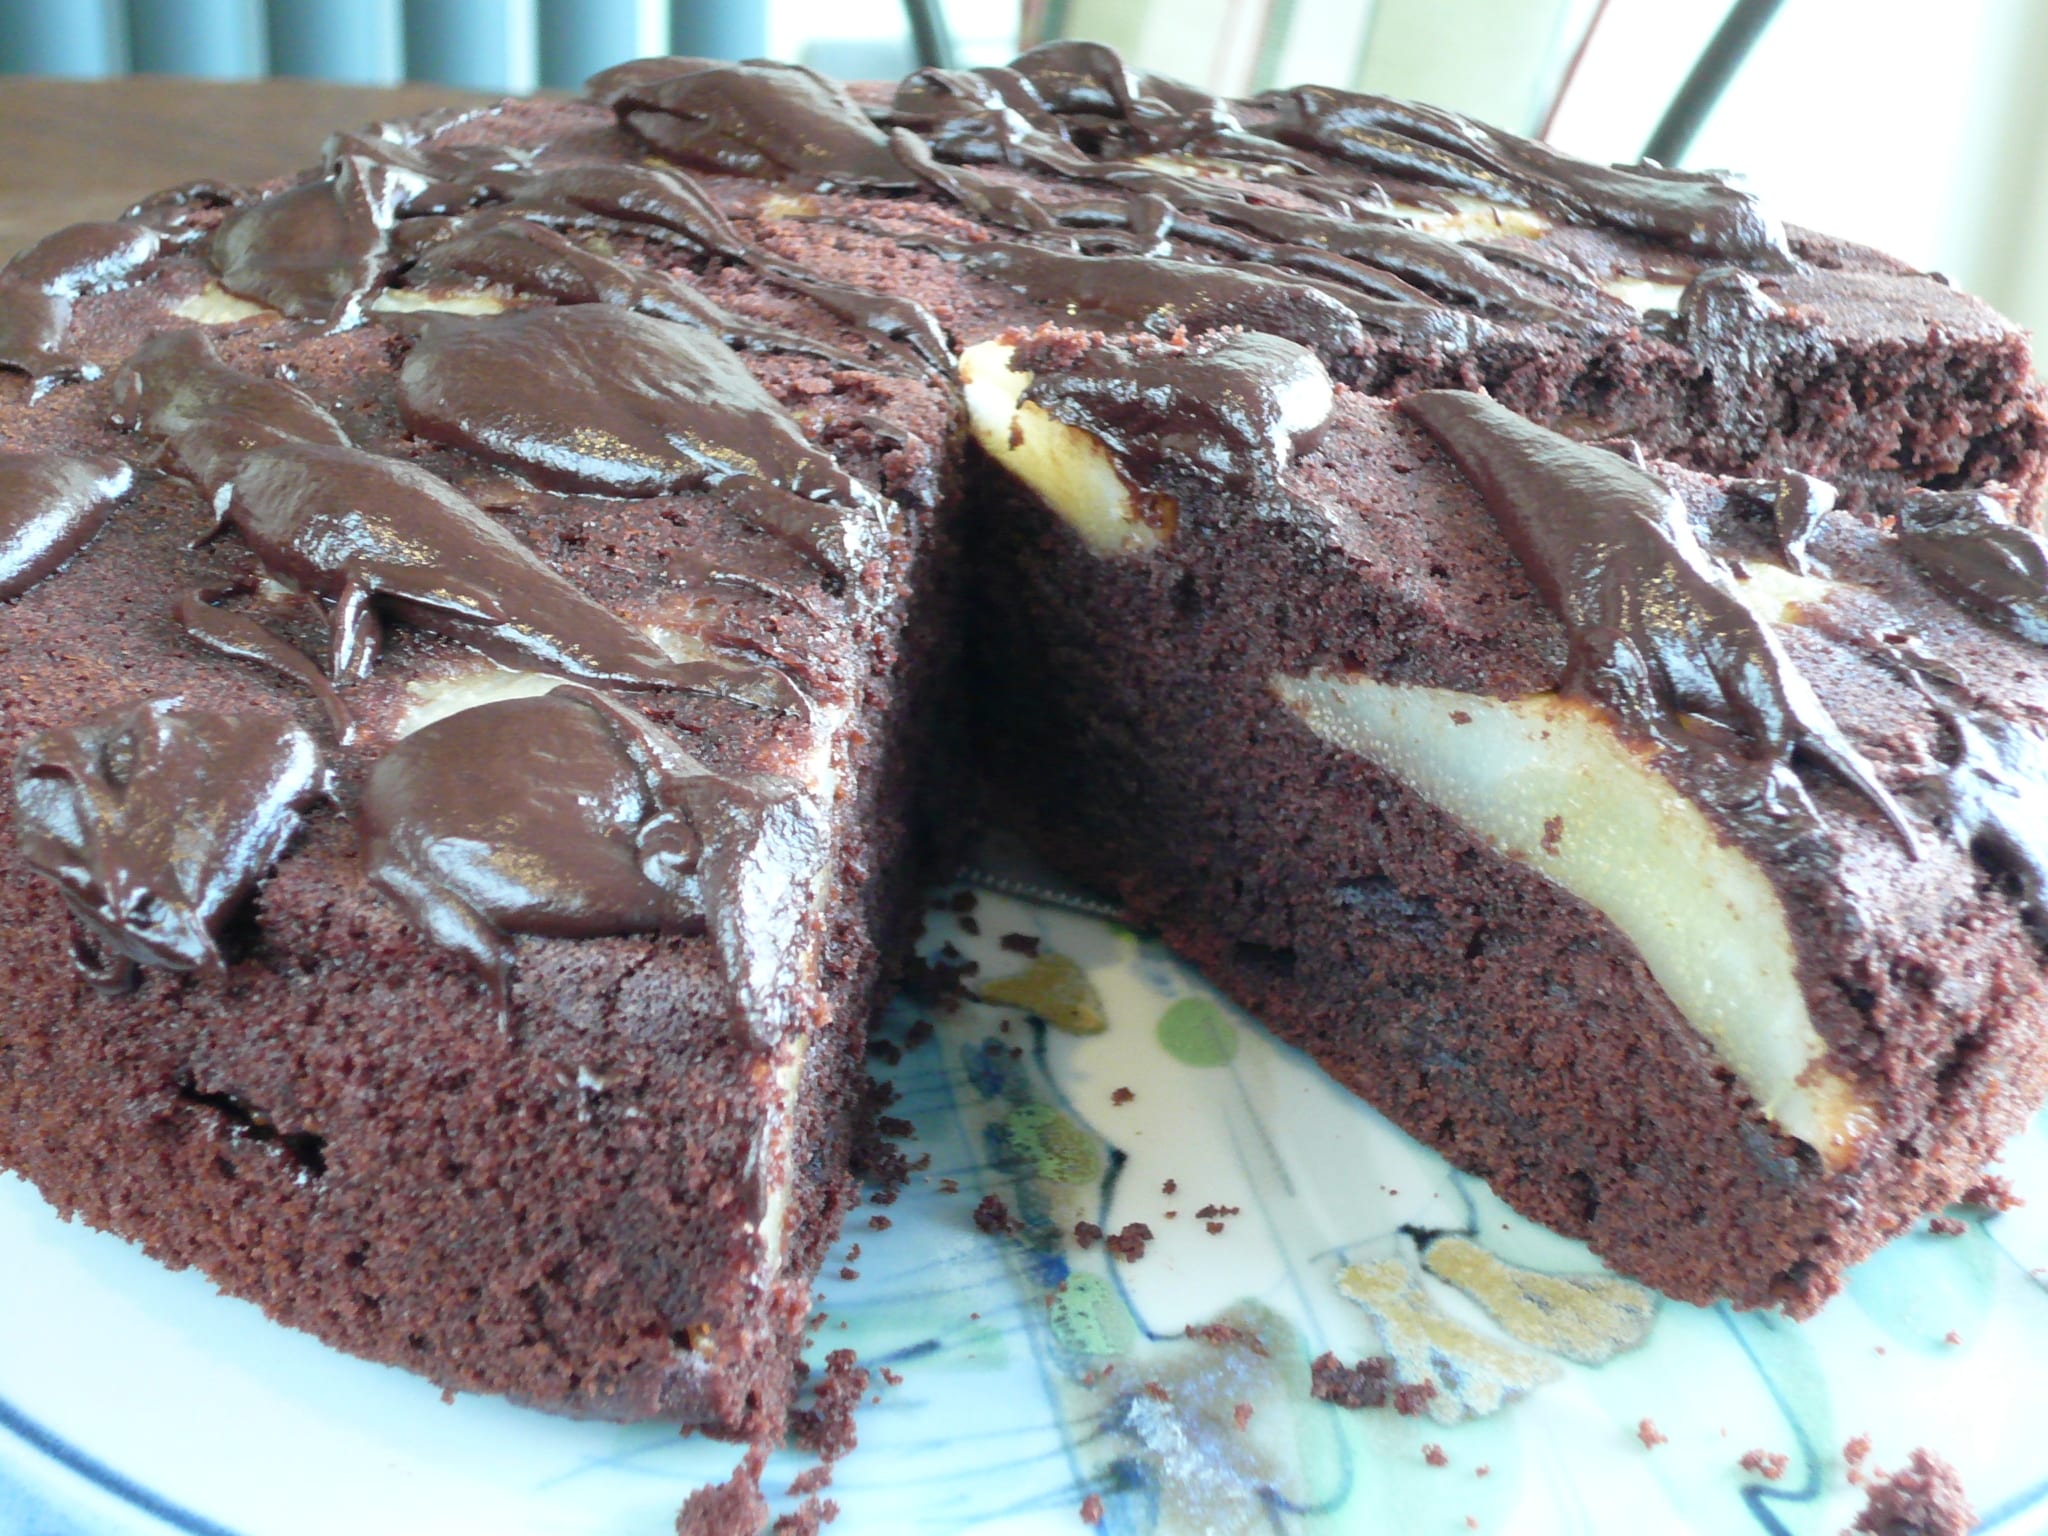 Chocolate cake baked with pear halves